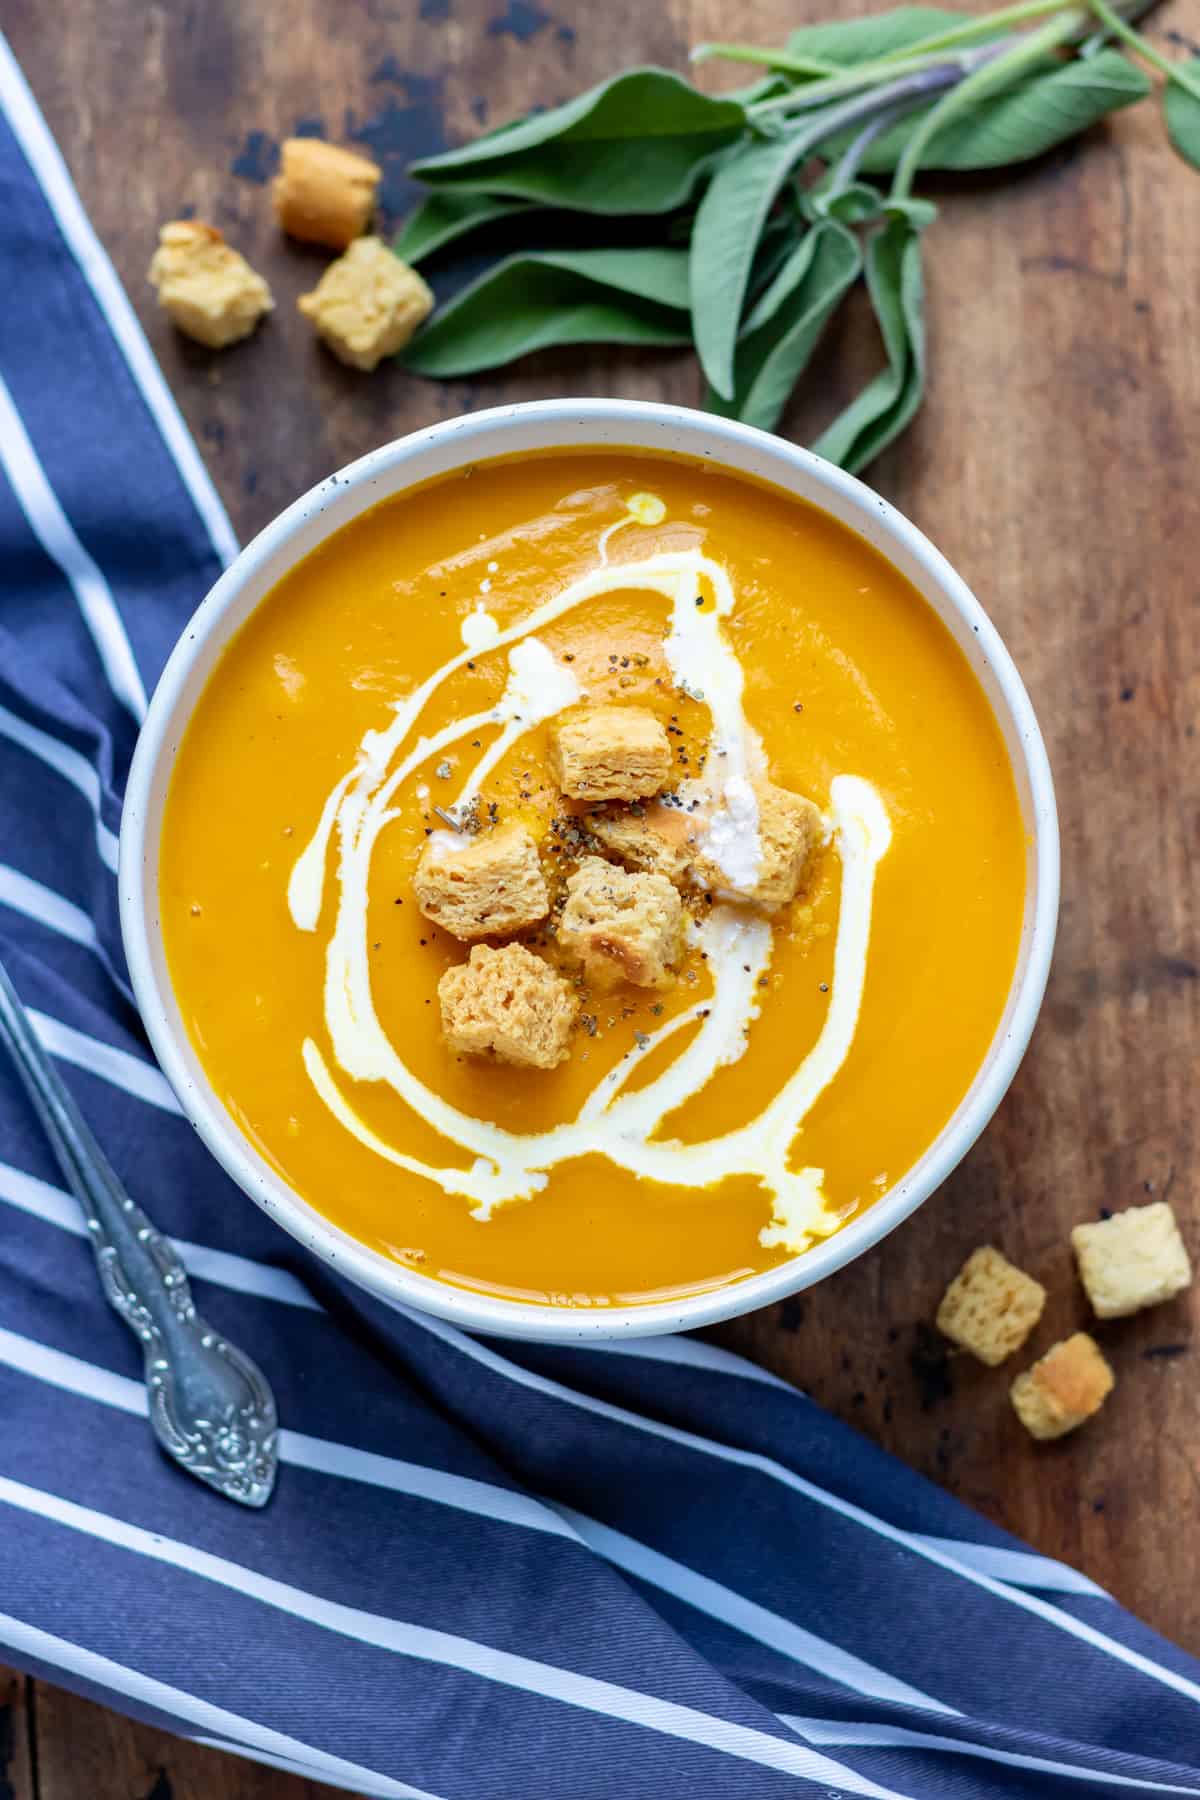 A table with a bowl of butternut squash with swirled cream and croutons.